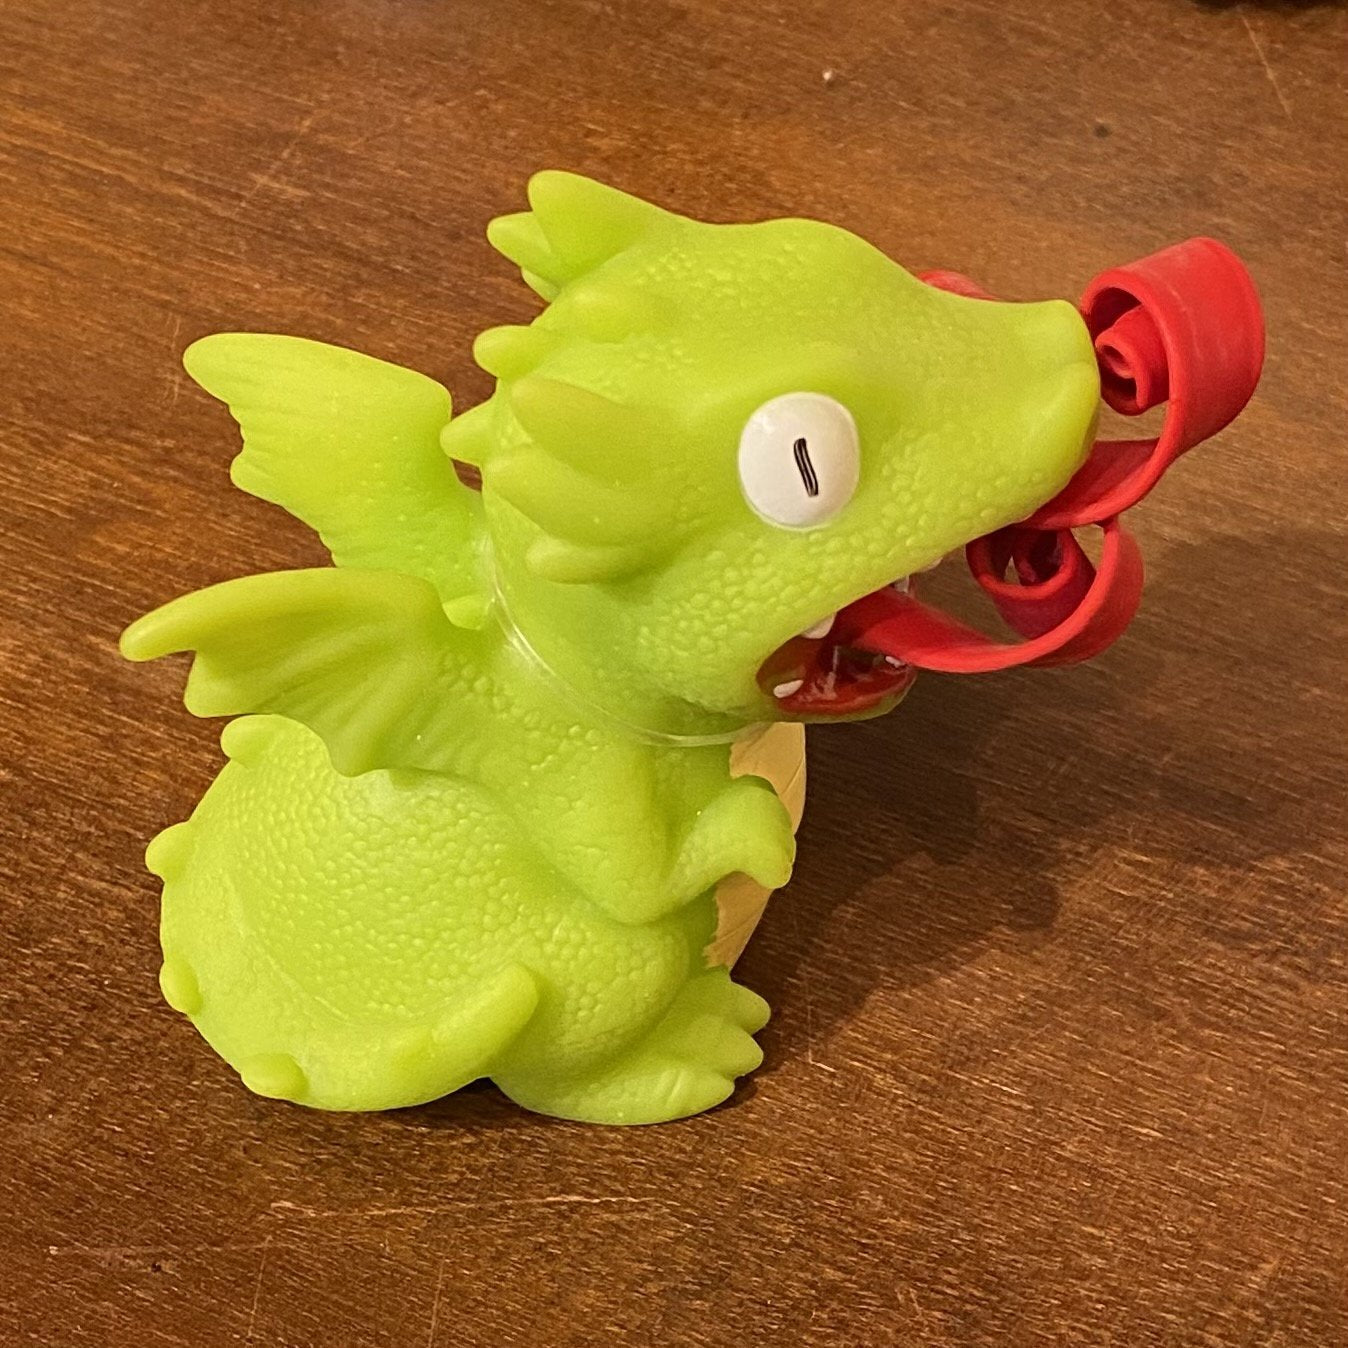 green orange, blue and green dragon with curled up fire in mouth